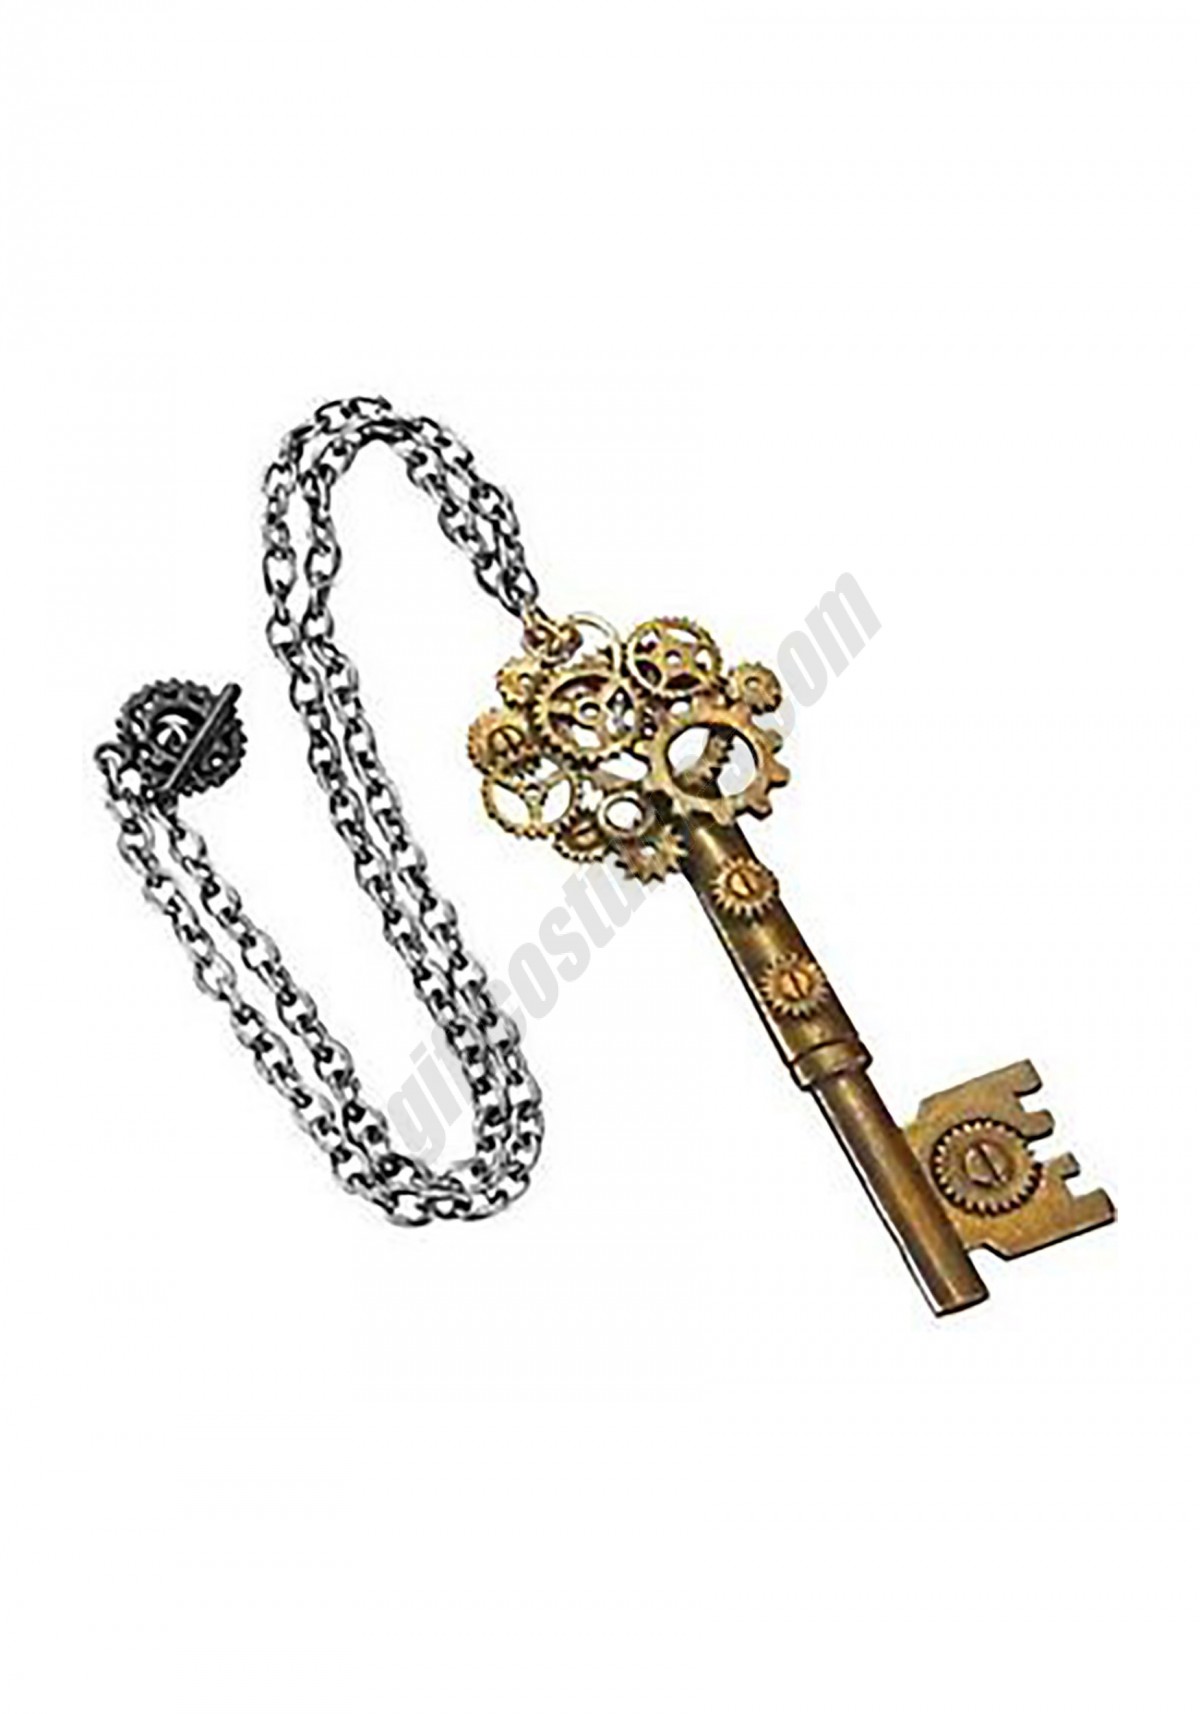 Large Key Gear Adult Necklace Promotions - -0